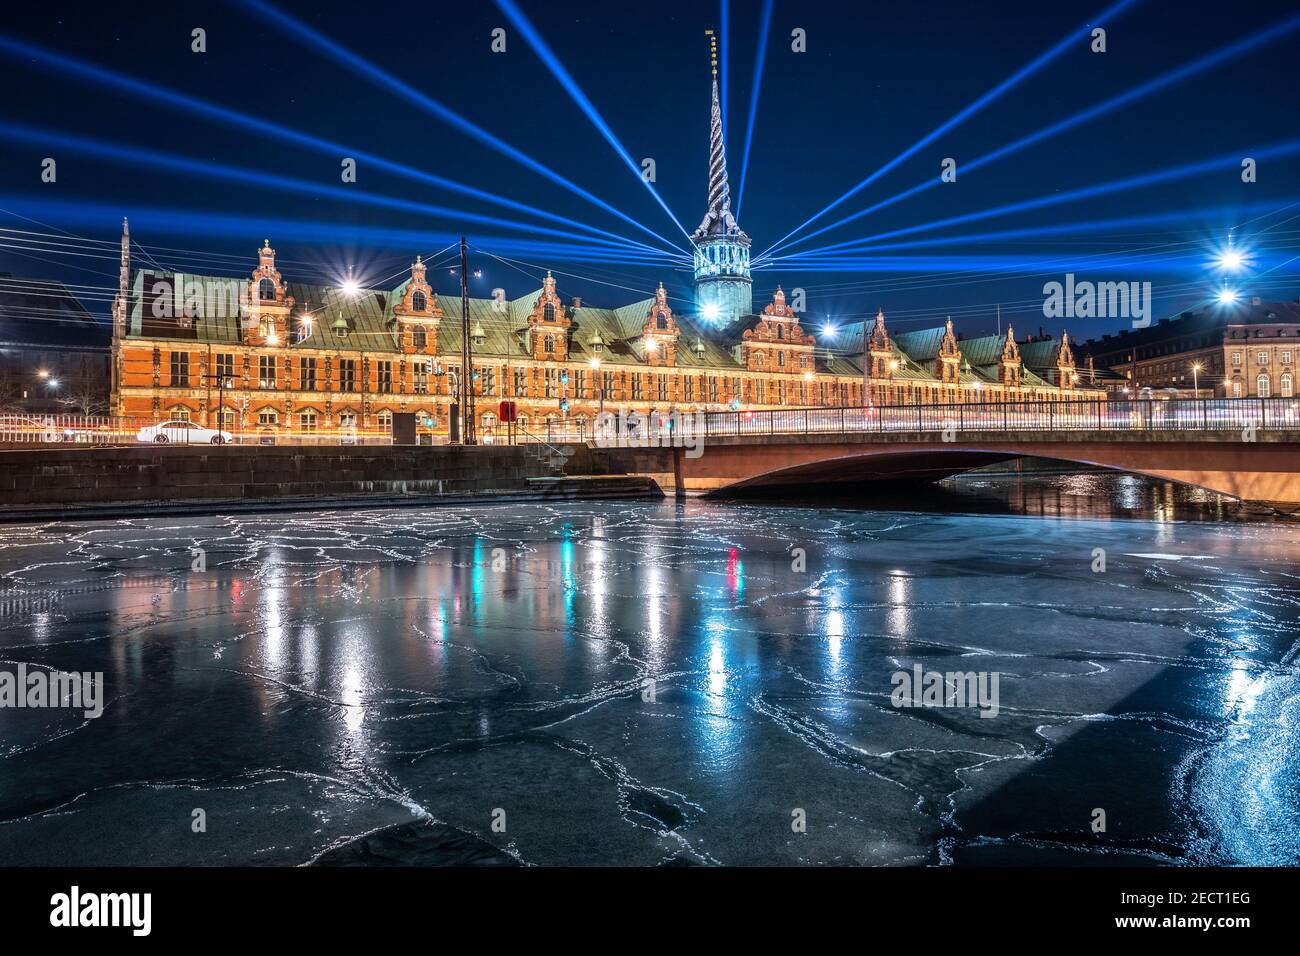 Copenhagen lights festival at night with lights mounted on Børsen tower and frozen canal, Denmark Stock Photo